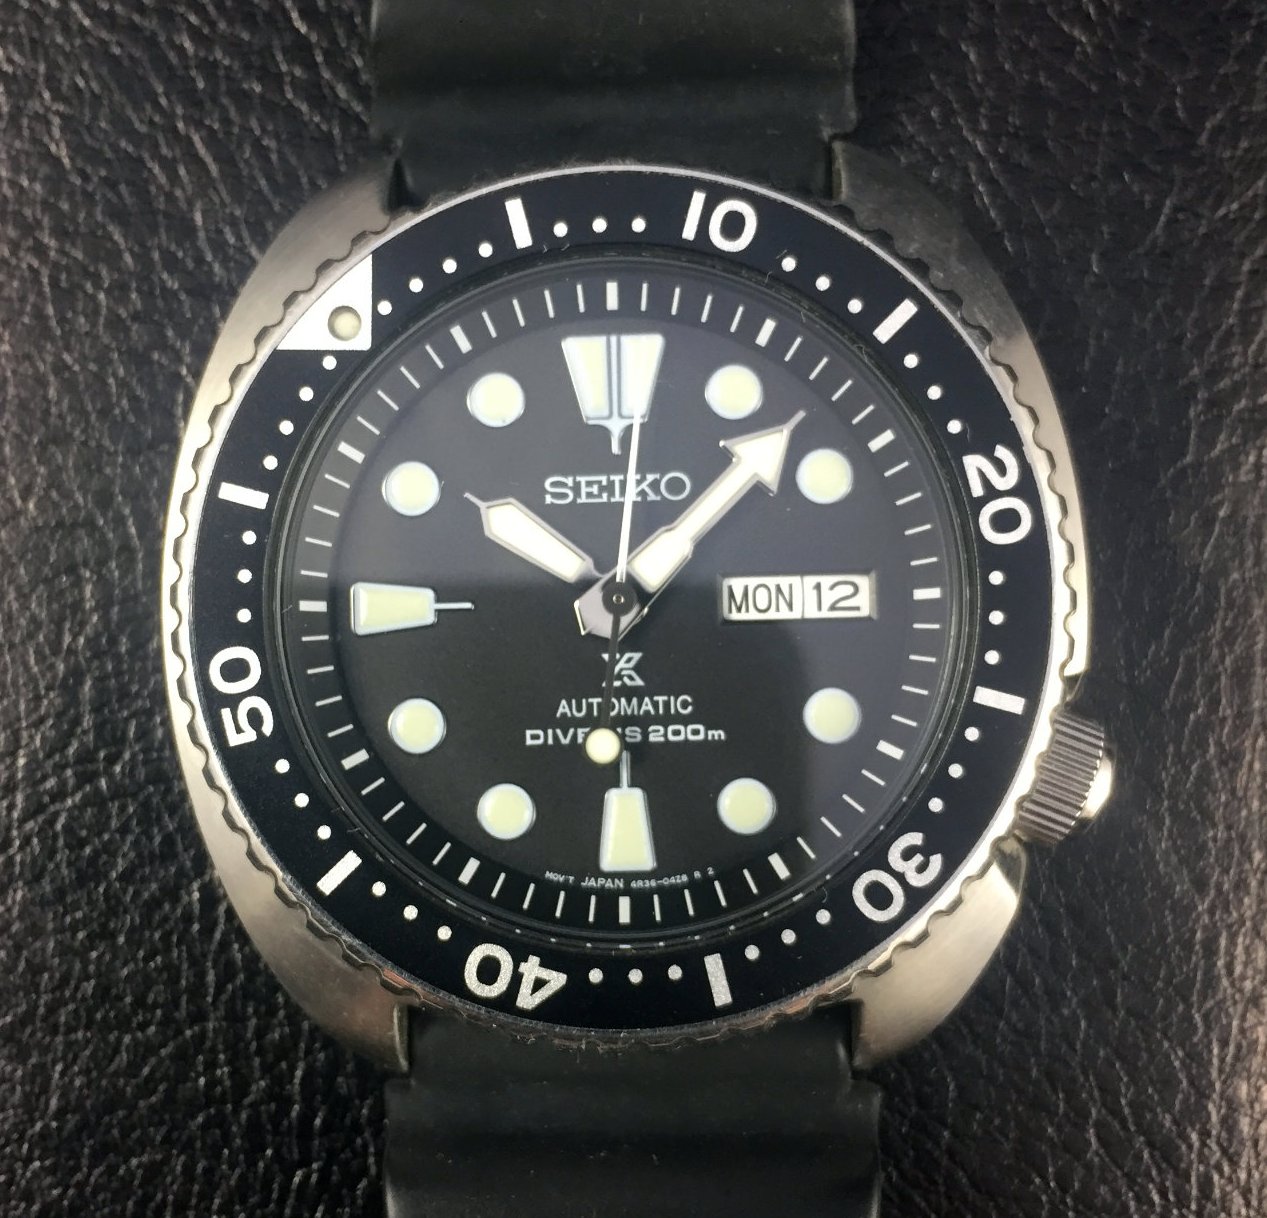 FS: Seiko SKX007 with SRP777 Turtle Dial and Oyster Bracelet